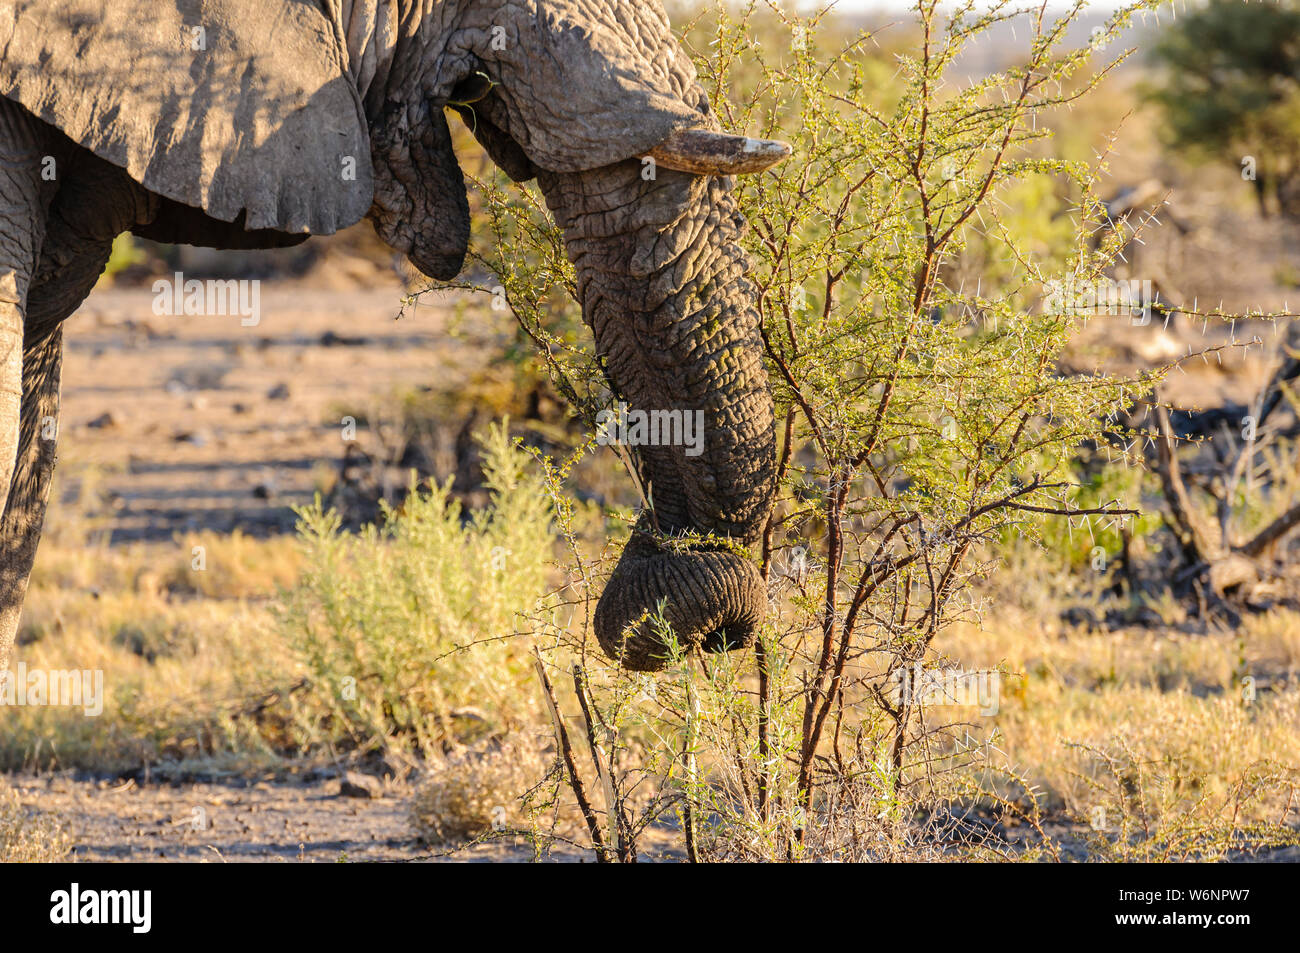 A young male elephant uses his trunk to strip a few leaves off a thorny bush to eat.  Etosha National Park, Namibia Stock Photo